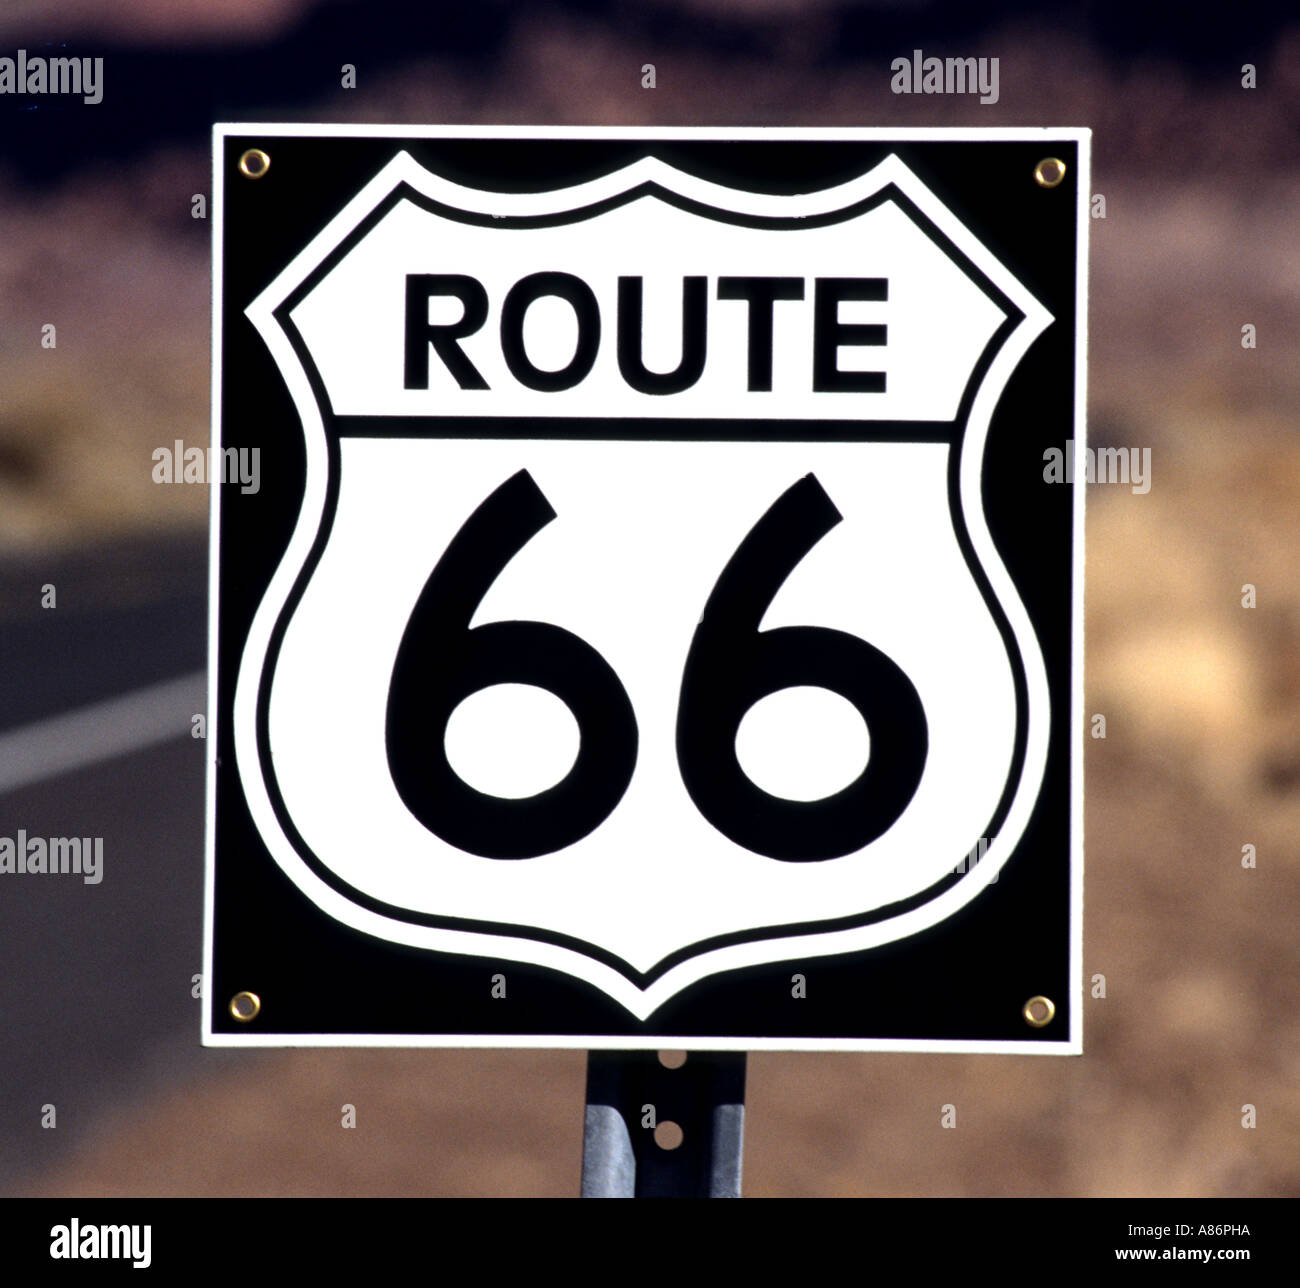 Route 66 United States America road traffic sign Banque D'Images